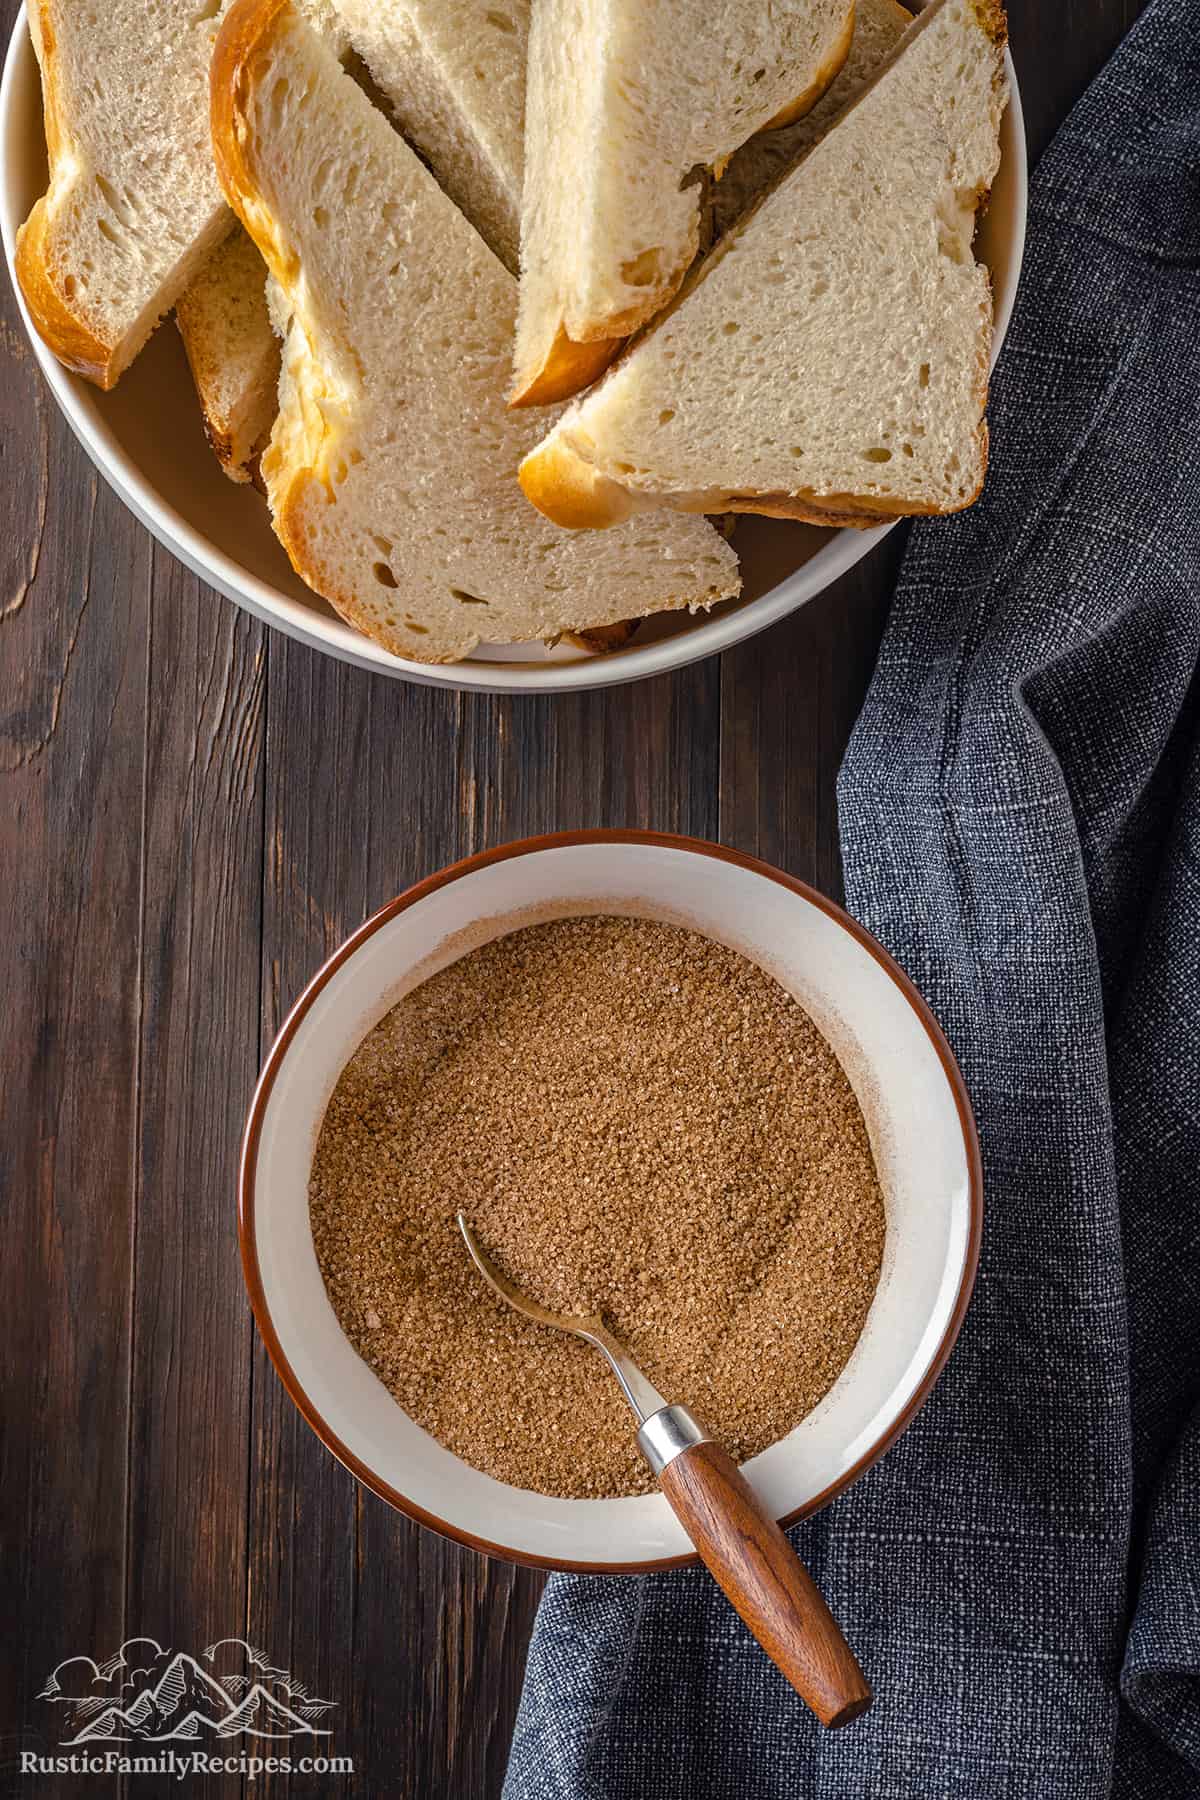 Cinnamon sugar in a bowl next to slices of challah